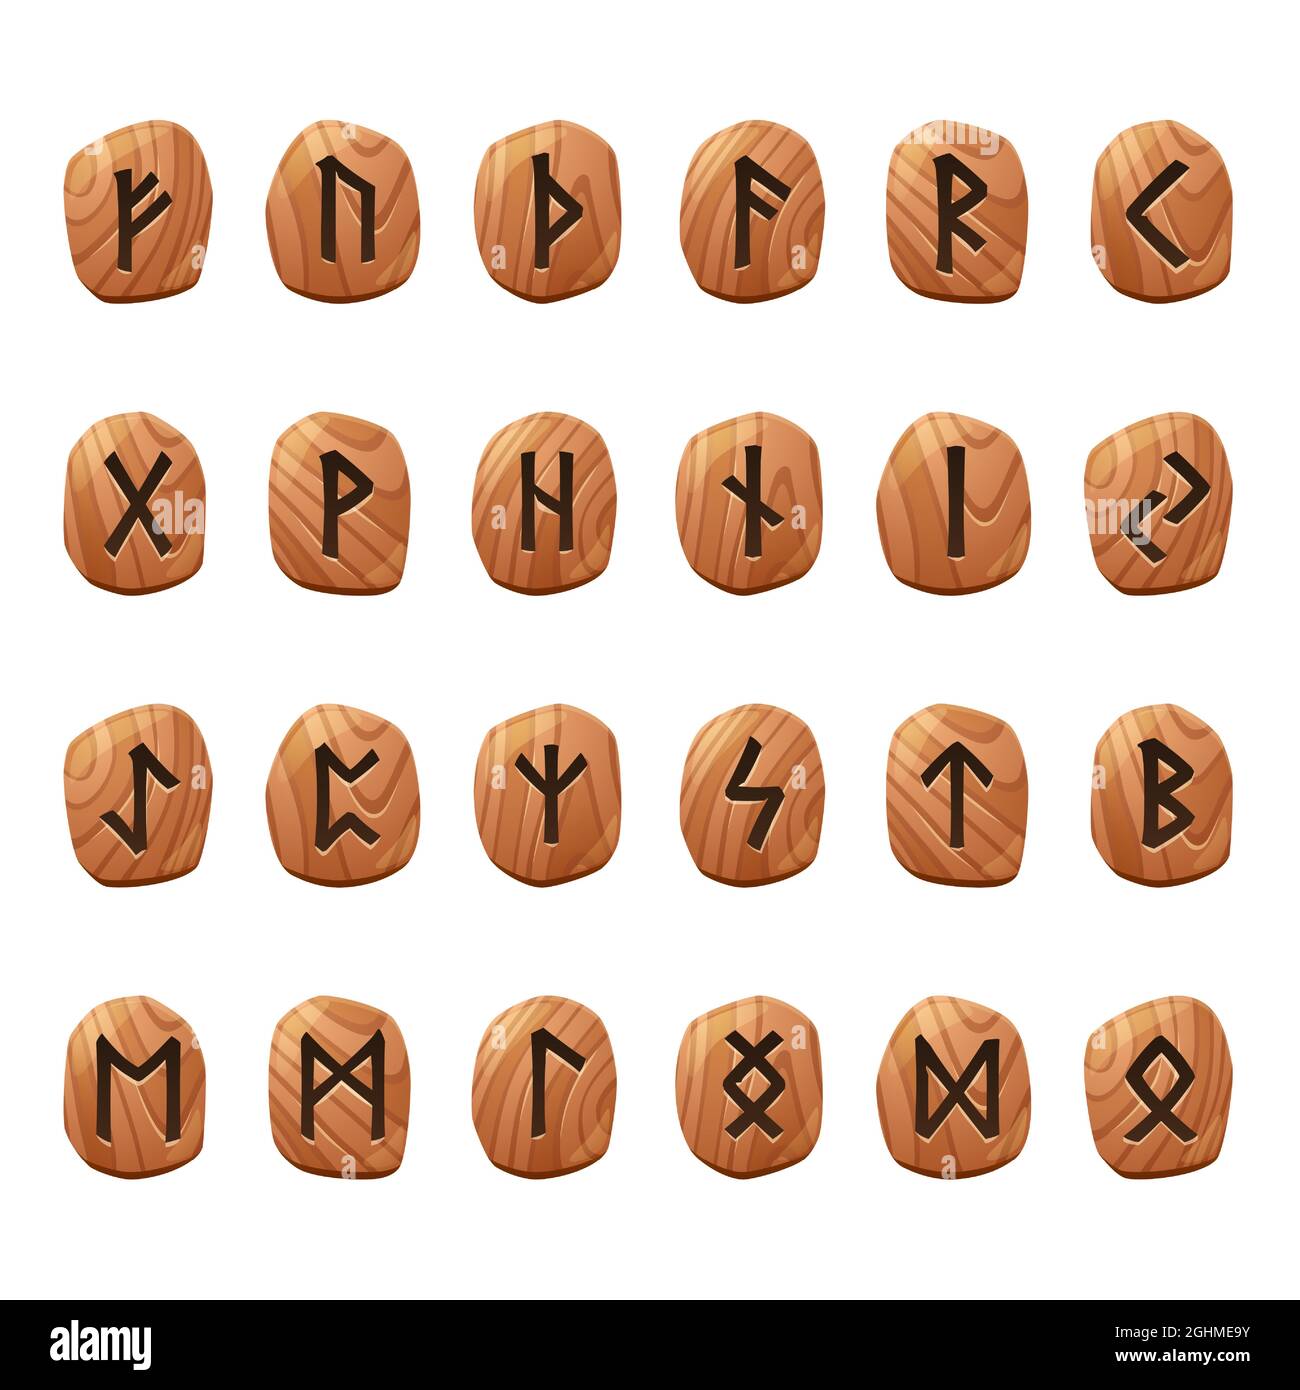 Set of game runes, nordic ancient alphabet, viking celtic futark symbols engraved on wooden pieces. Esoteric occult signs, mystic ui or gui design elements, isolated cartoon vector illustration, icons Stock Vector